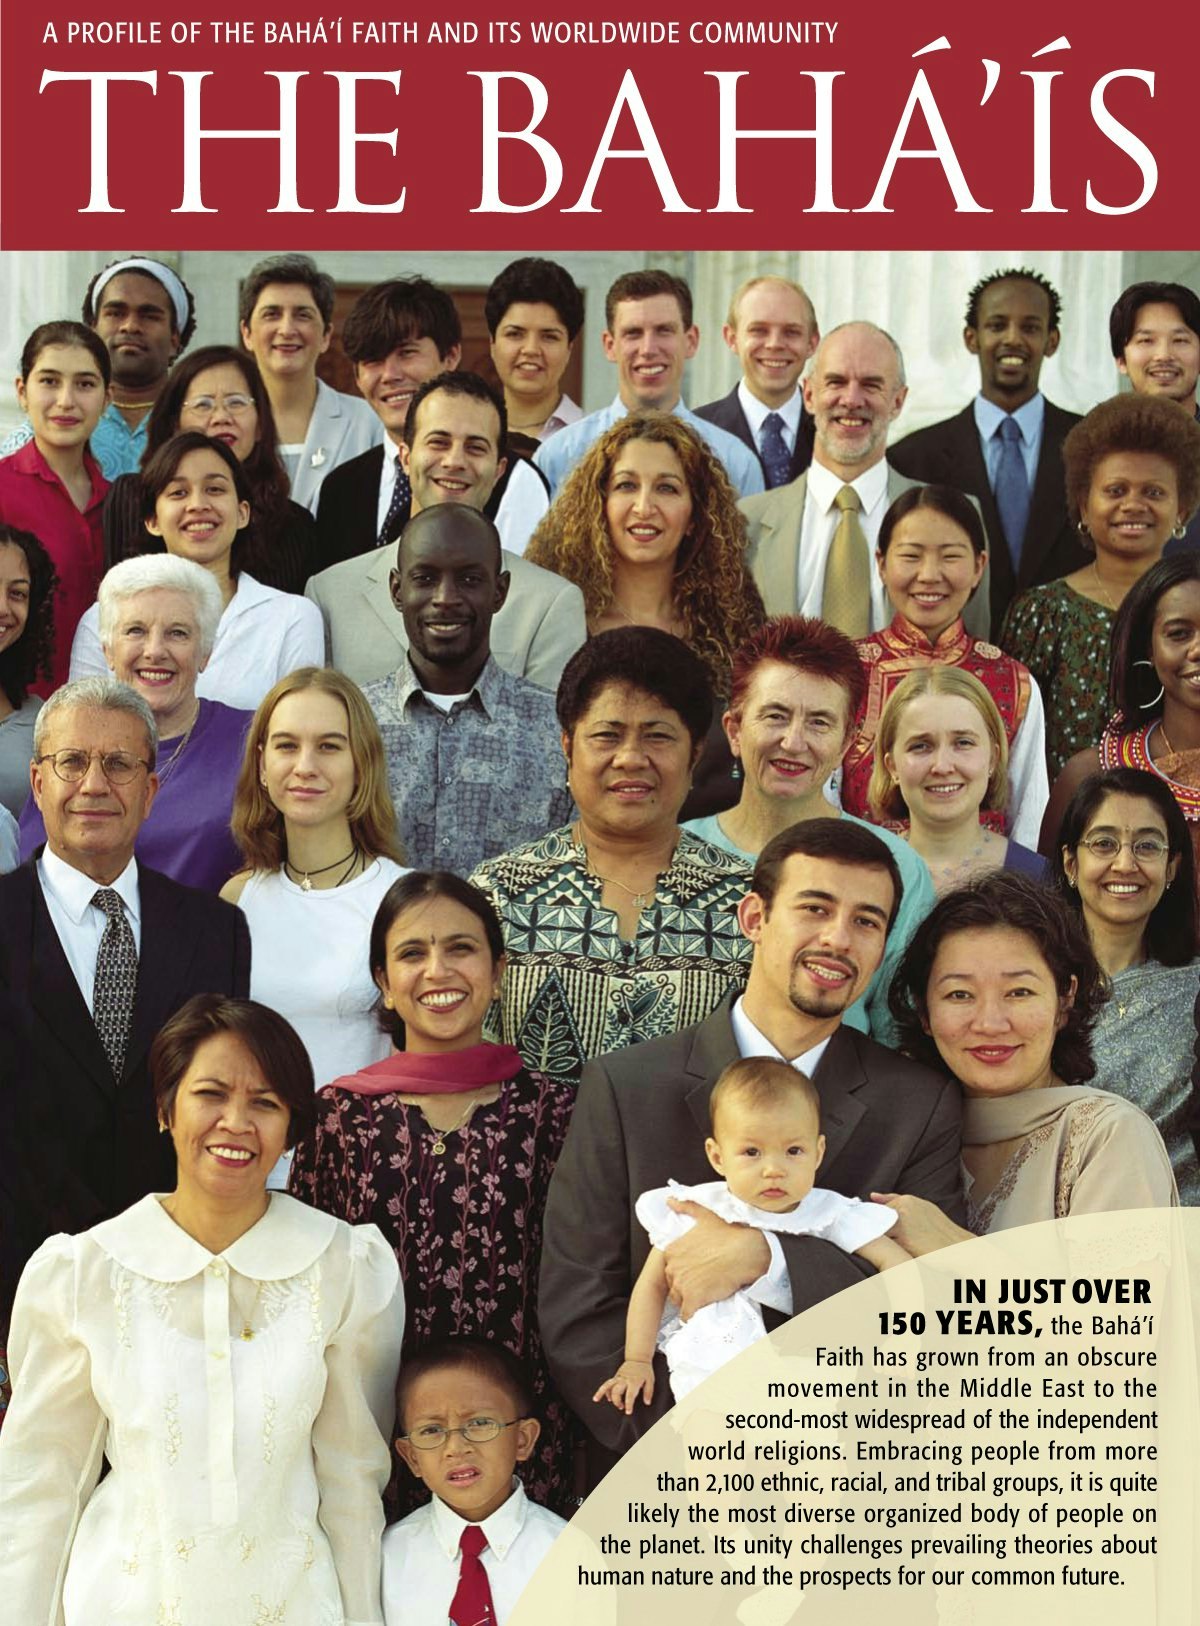 The front cover of 'The Baha'is' magazine.